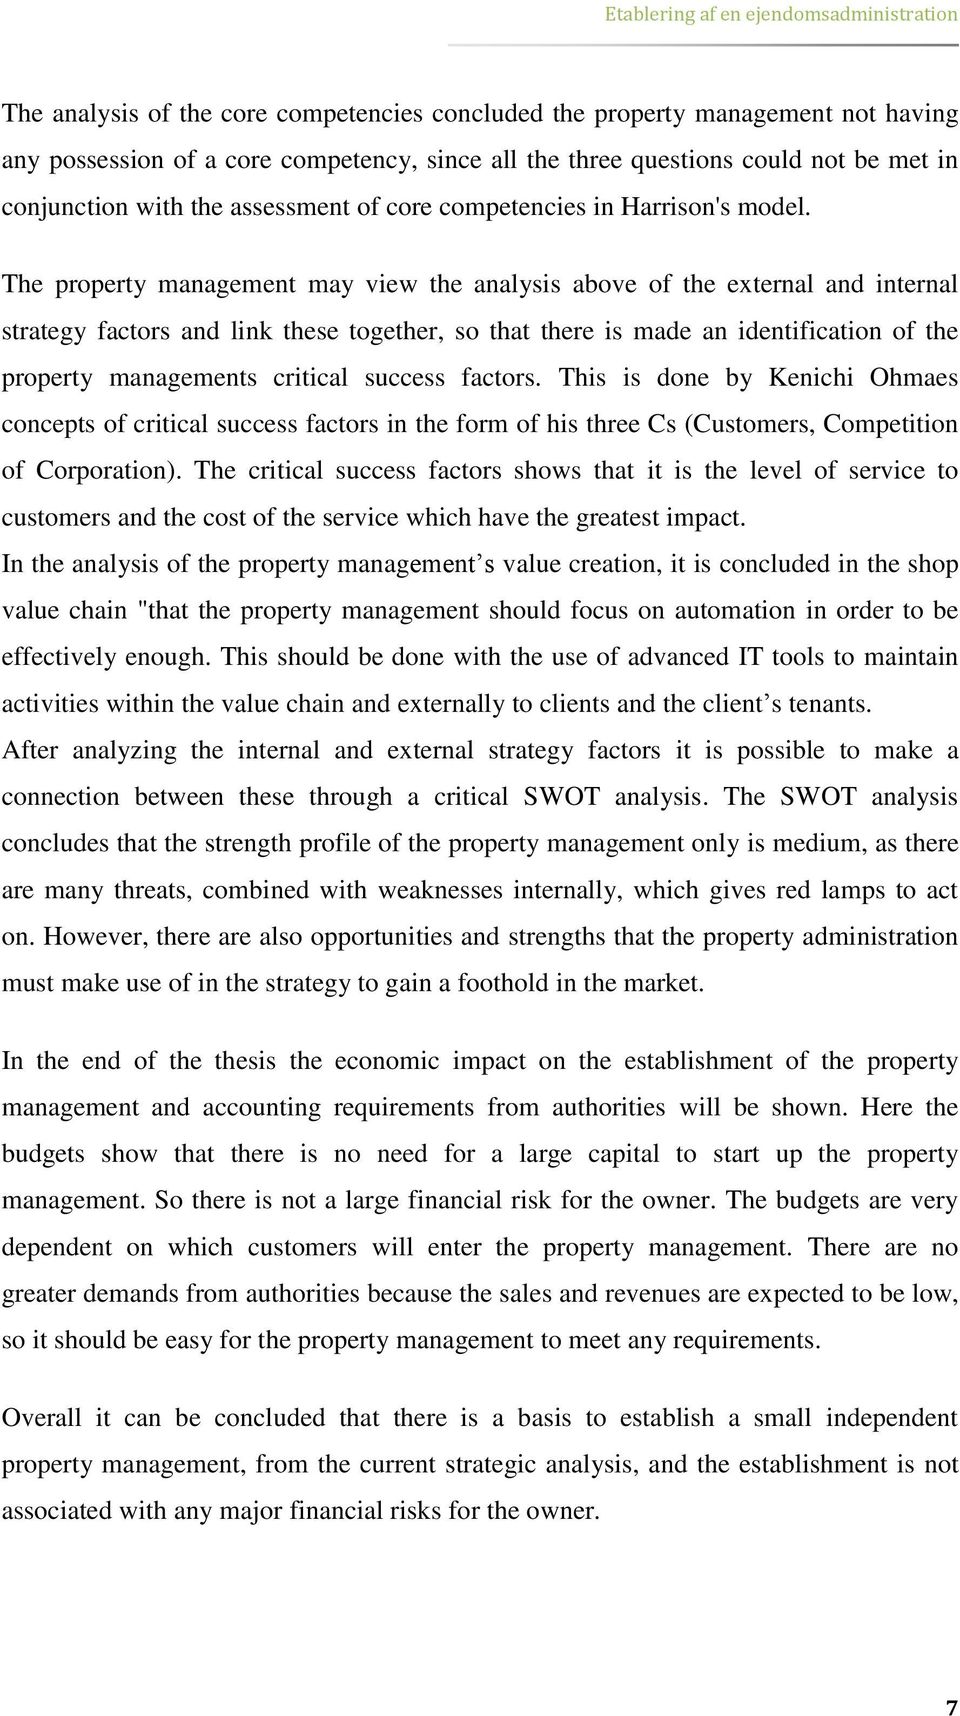 The property management may view the analysis above of the external and internal strategy factors and link these together, so that there is made an identification of the property managements critical